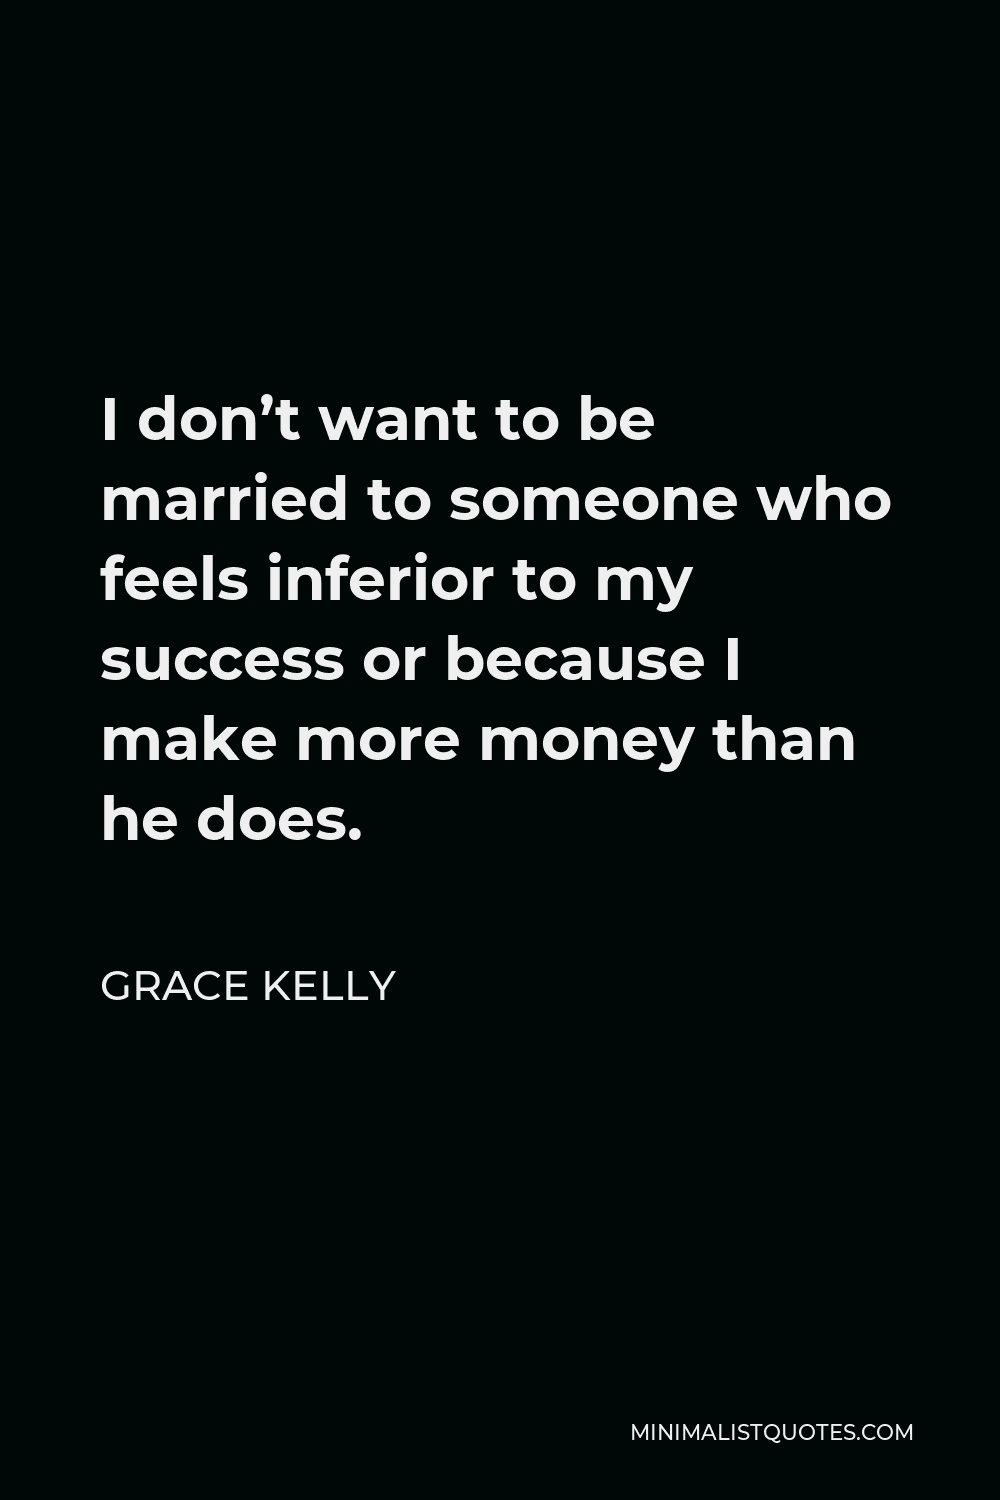 Grace Kelly Quote - I don’t want to be married to someone who feels inferior to my success or because I make more money than he does.